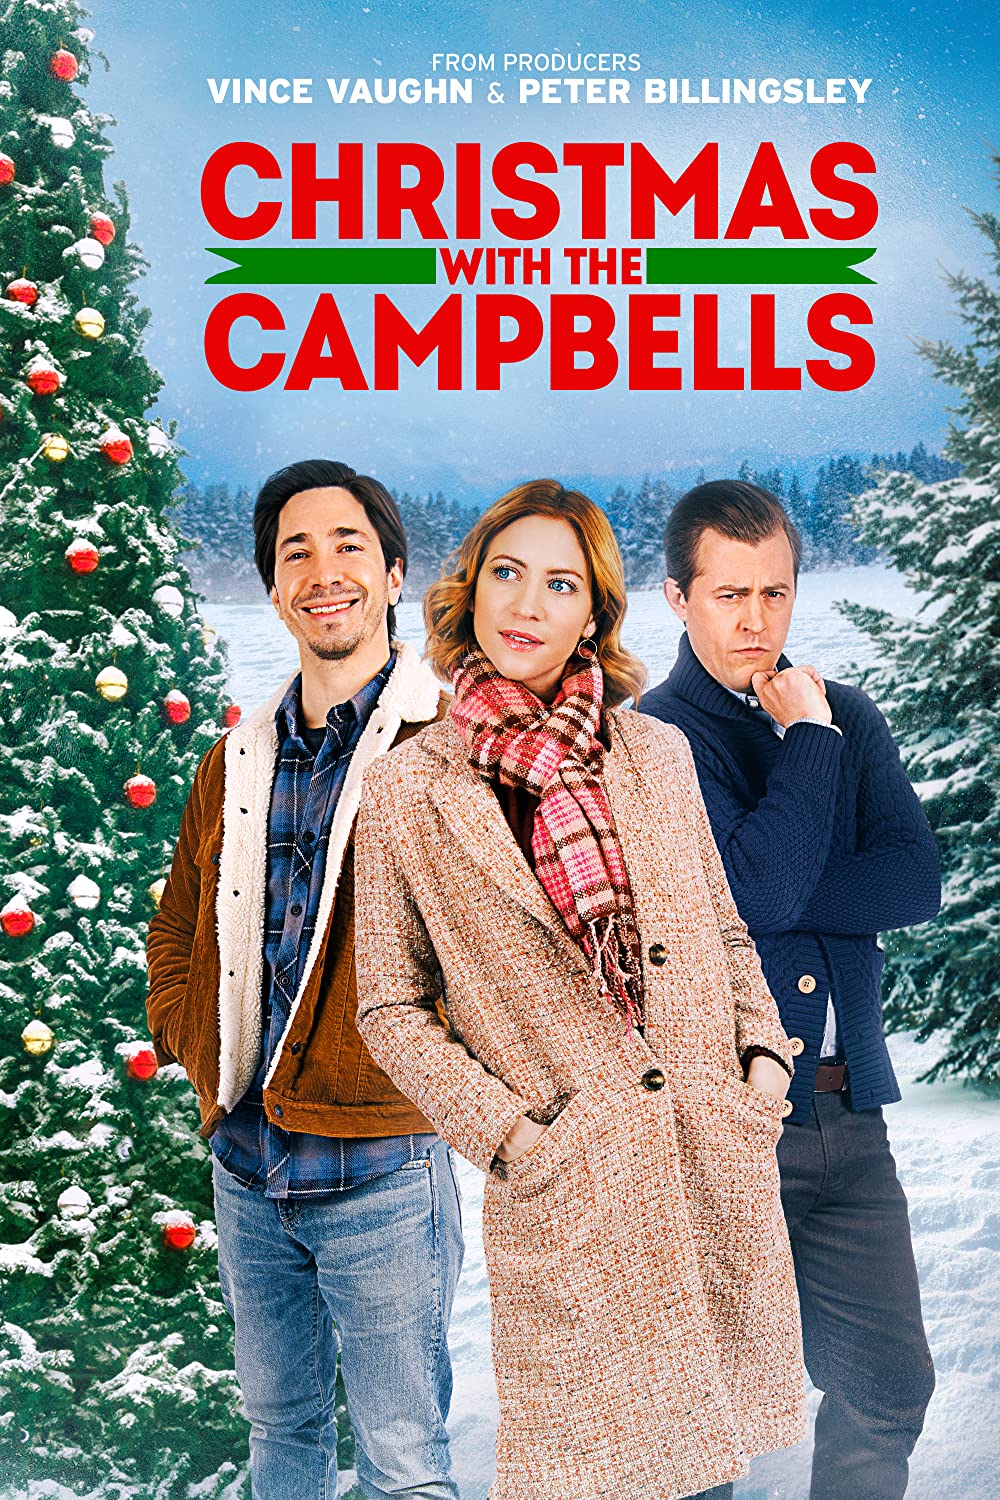 Christmas with the Campbells 2022 English 480p HDRip ESub 350MB Download